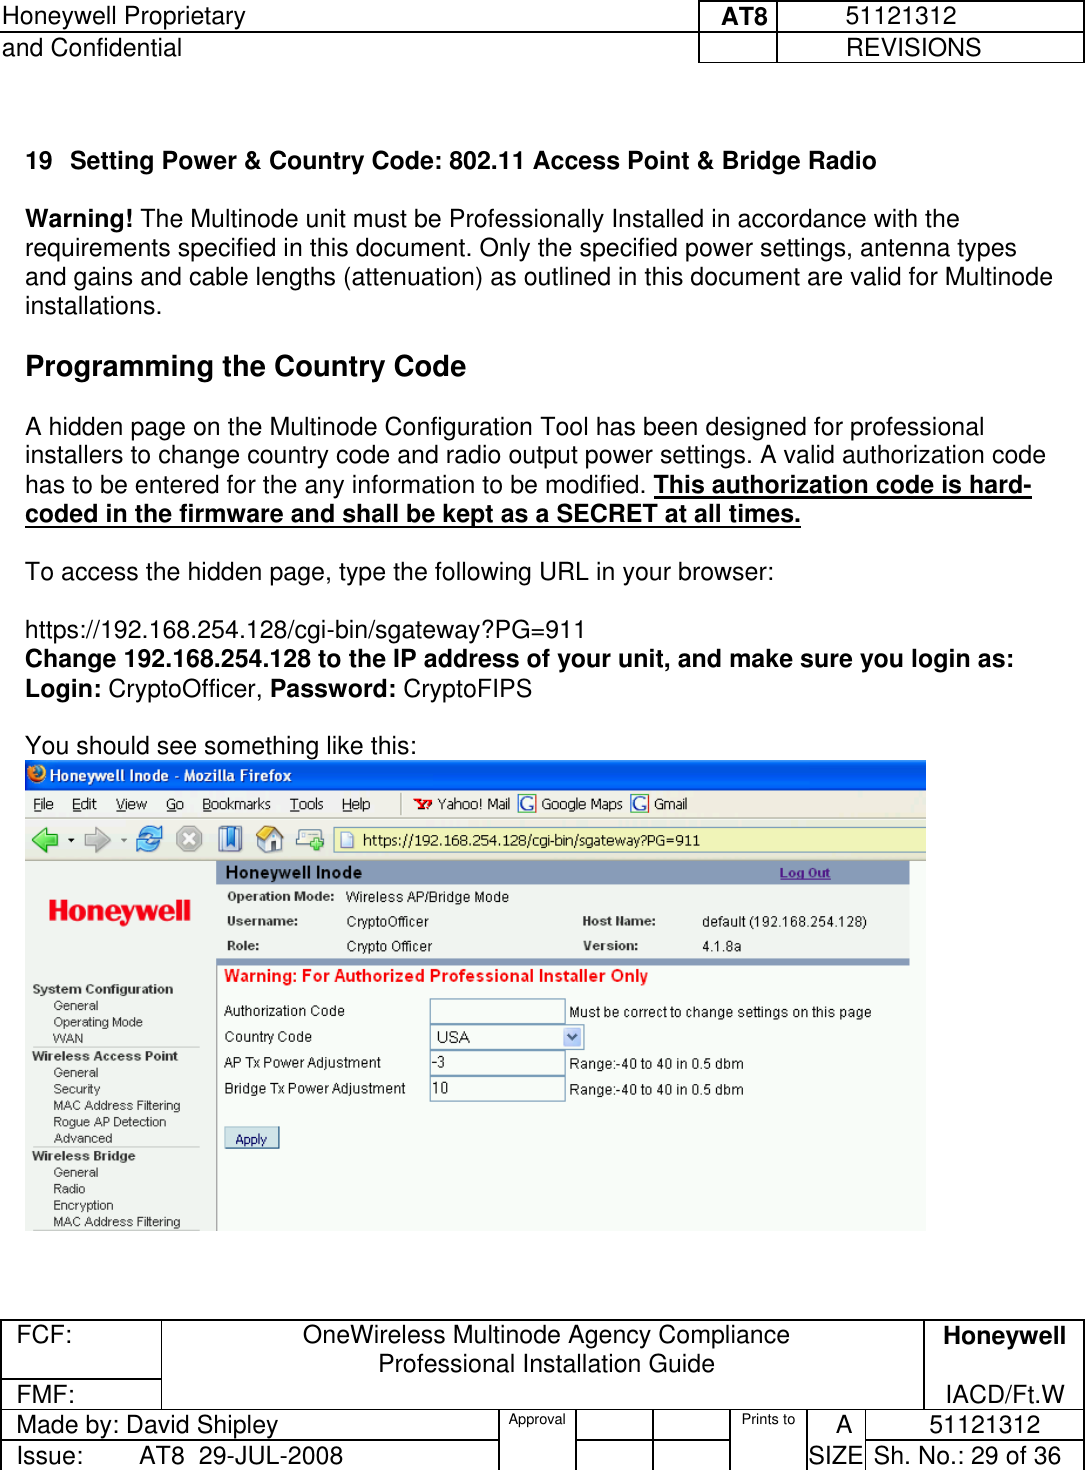 Honeywell Proprietary     AT8          51121312 and Confidential             REVISIONS  FCF:  OneWireless Multinode Agency Compliance Professional Installation Guide  Honeywell FMF:               IACD/Ft.W Made by: David Shipley  Approval   Prints to     A           51121312 Issue:        AT8  29-JUL-2008          SIZE  Sh. No.: 29 of 36   19  Setting Power &amp; Country Code: 802.11 Access Point &amp; Bridge Radio  Warning! The Multinode unit must be Professionally Installed in accordance with the requirements specified in this document. Only the specified power settings, antenna types and gains and cable lengths (attenuation) as outlined in this document are valid for Multinode installations.   Programming the Country Code  A hidden page on the Multinode Configuration Tool has been designed for professional installers to change country code and radio output power settings. A valid authorization code has to be entered for the any information to be modified. This authorization code is hard-coded in the firmware and shall be kept as a SECRET at all times.  To access the hidden page, type the following URL in your browser:  https://192.168.254.128/cgi-bin/sgateway?PG=911 Change 192.168.254.128 to the IP address of your unit, and make sure you login as:  Login: CryptoOfficer, Password: CryptoFIPS   You should see something like this:    